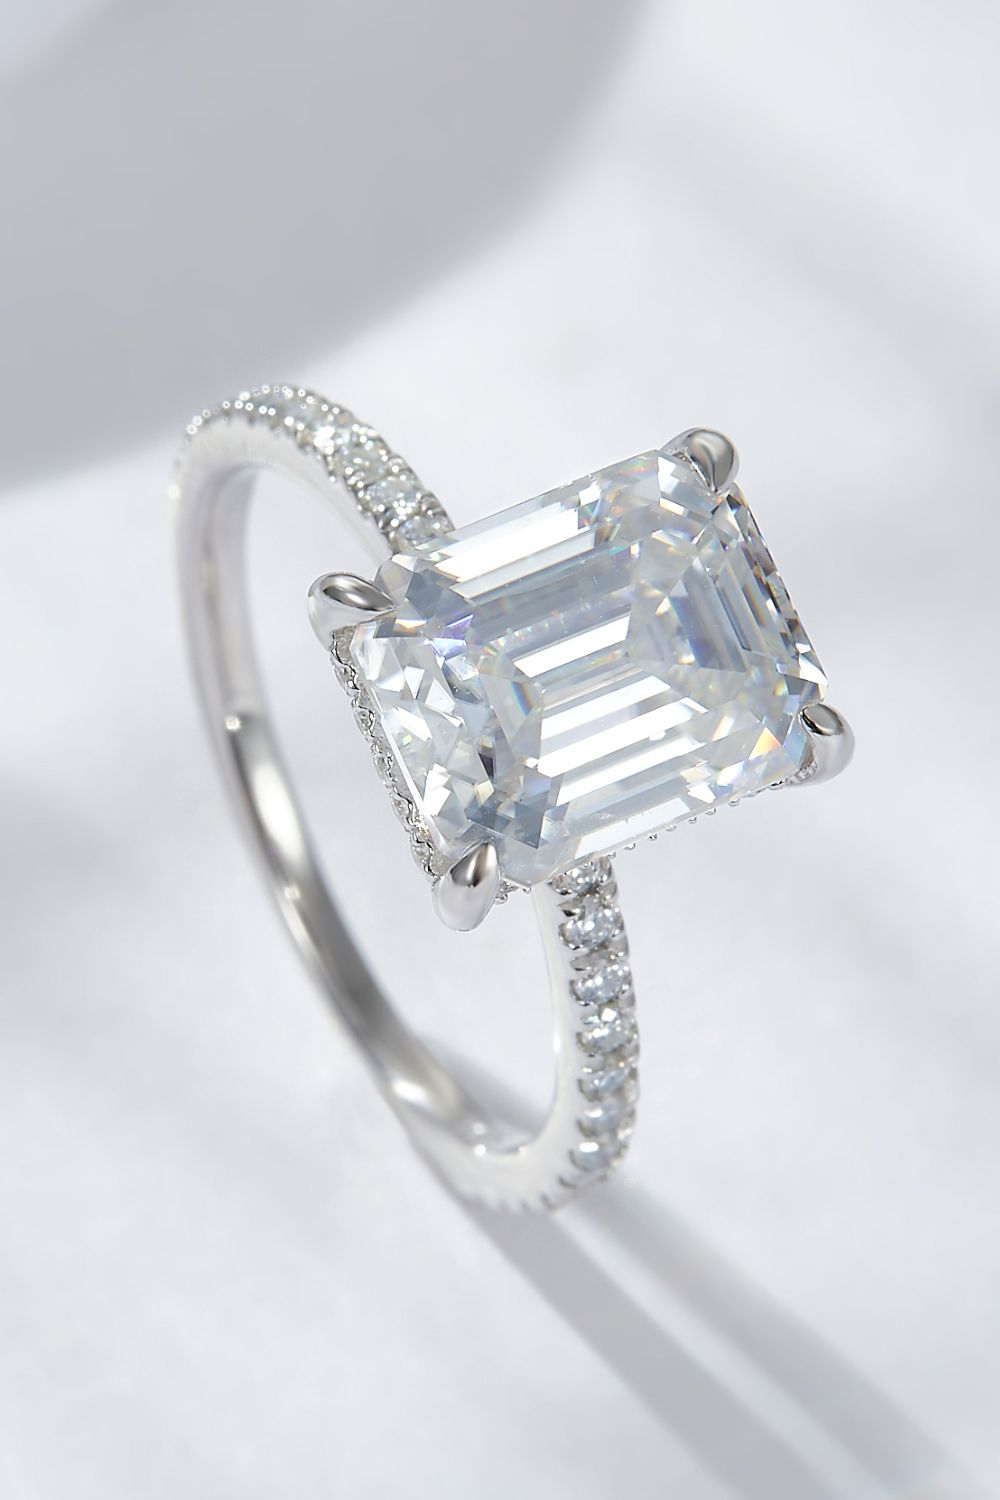 Emerald Cut 4 Carat Moissanite Side Stone Ring - Tophatter Shopping Deals